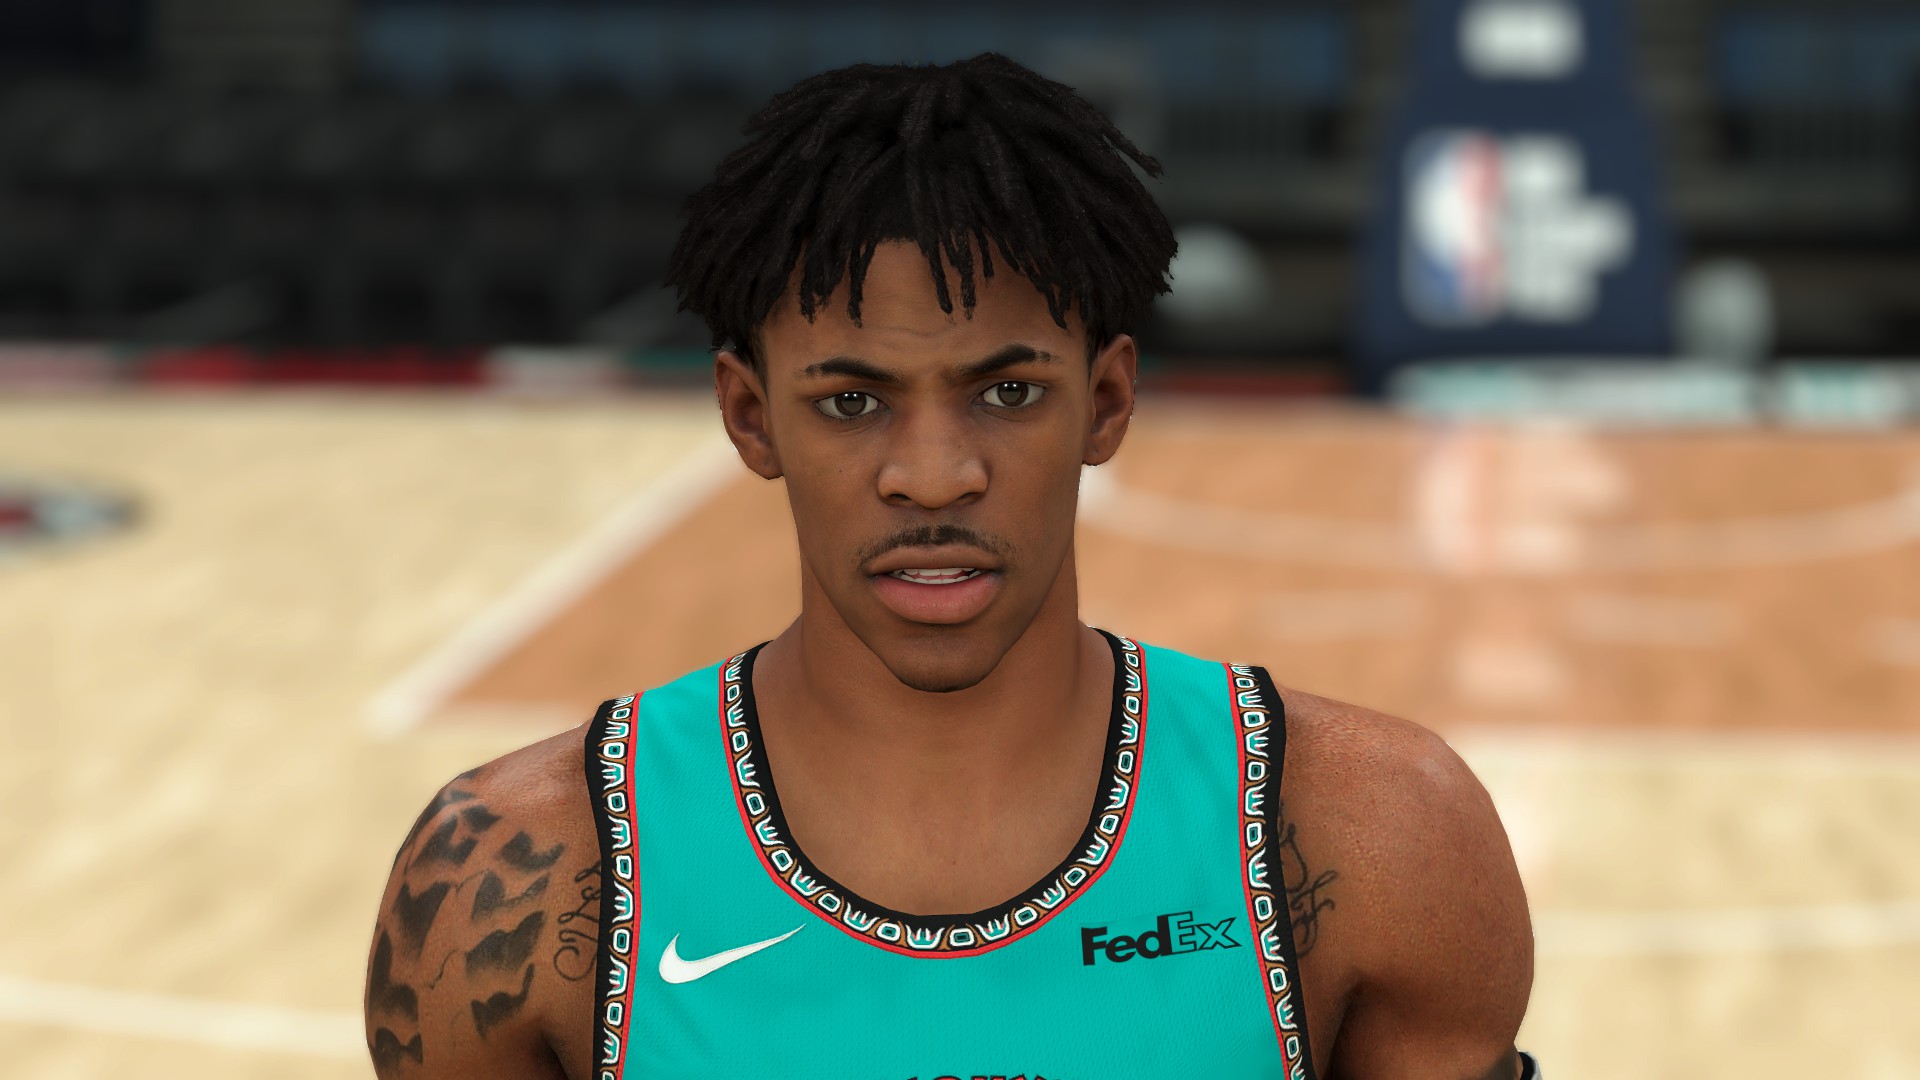 Ja Morant Cyberface Hair And Body Model V3 0 By Hewei For 2k21